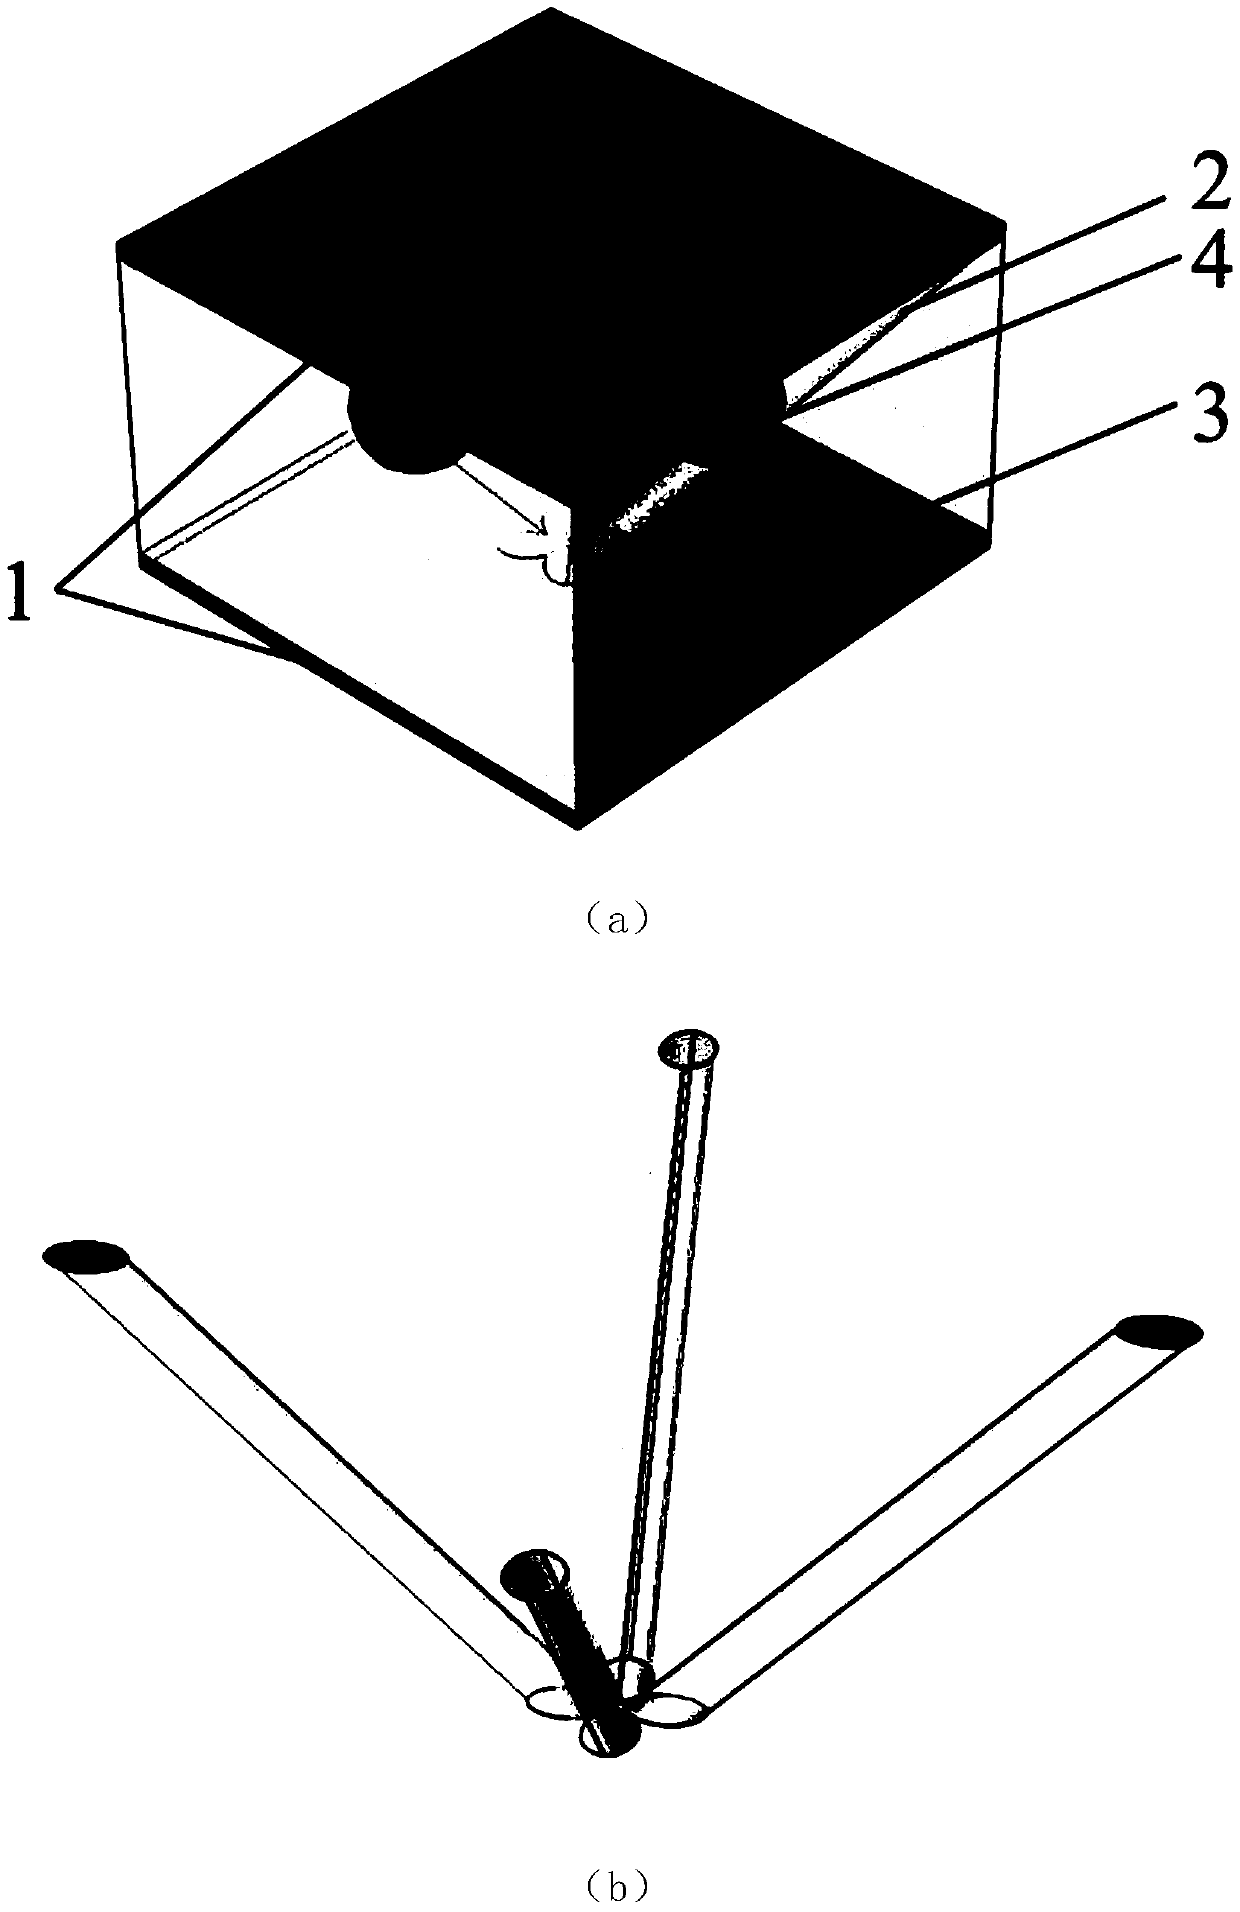 Pyramidal dot matrix scatterer inclusion-type underwater sound absorption structure